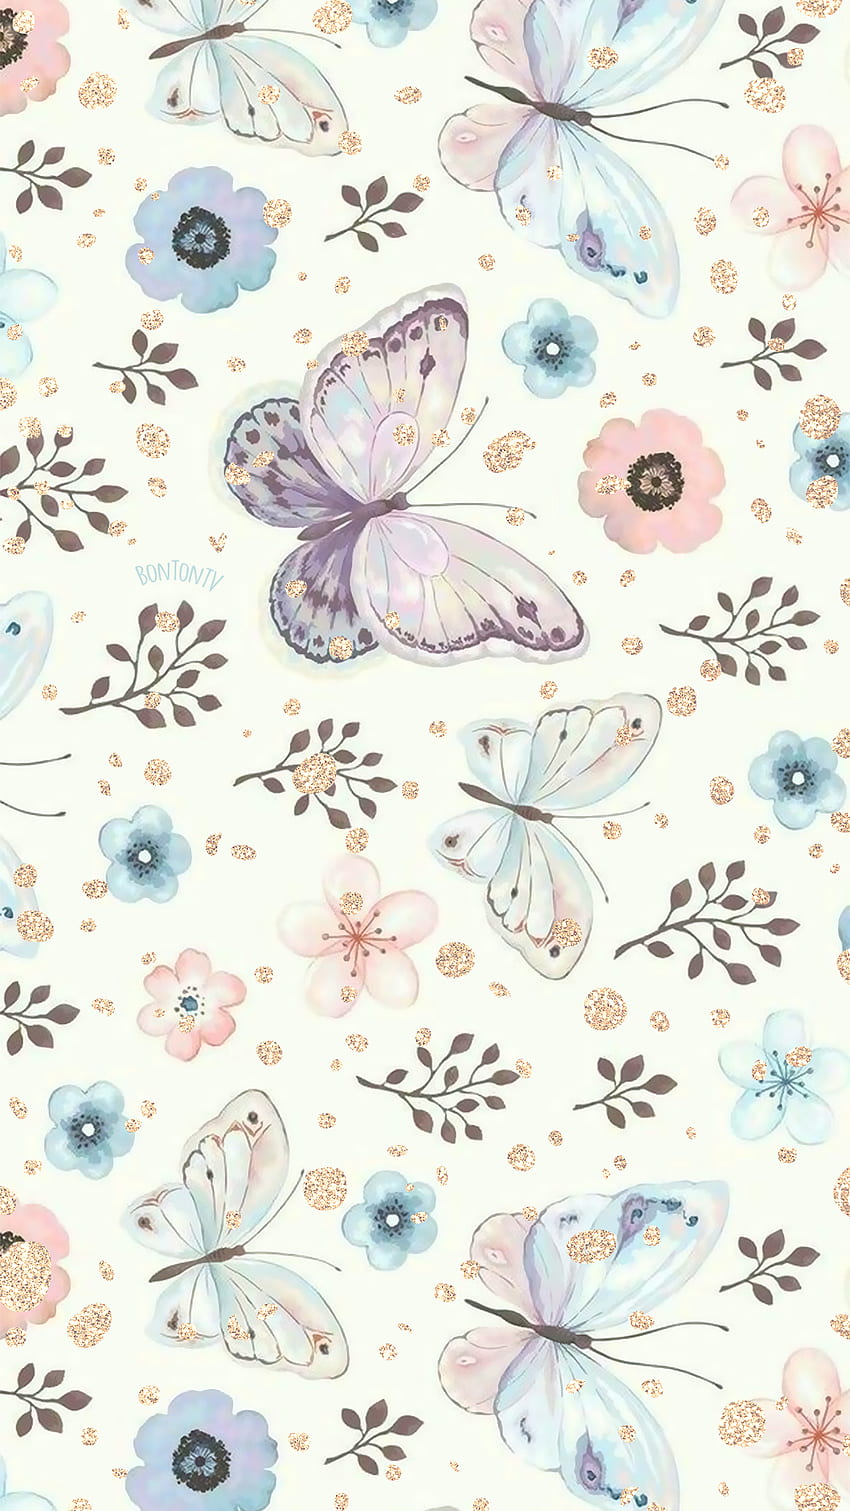 Telefonní tapety - - by Bonton TV - - iPhone, Android in 2020. Butterfly iphone, Butterfly watercolor, Artsy iphone, Feminine Papel de parede de celular HD